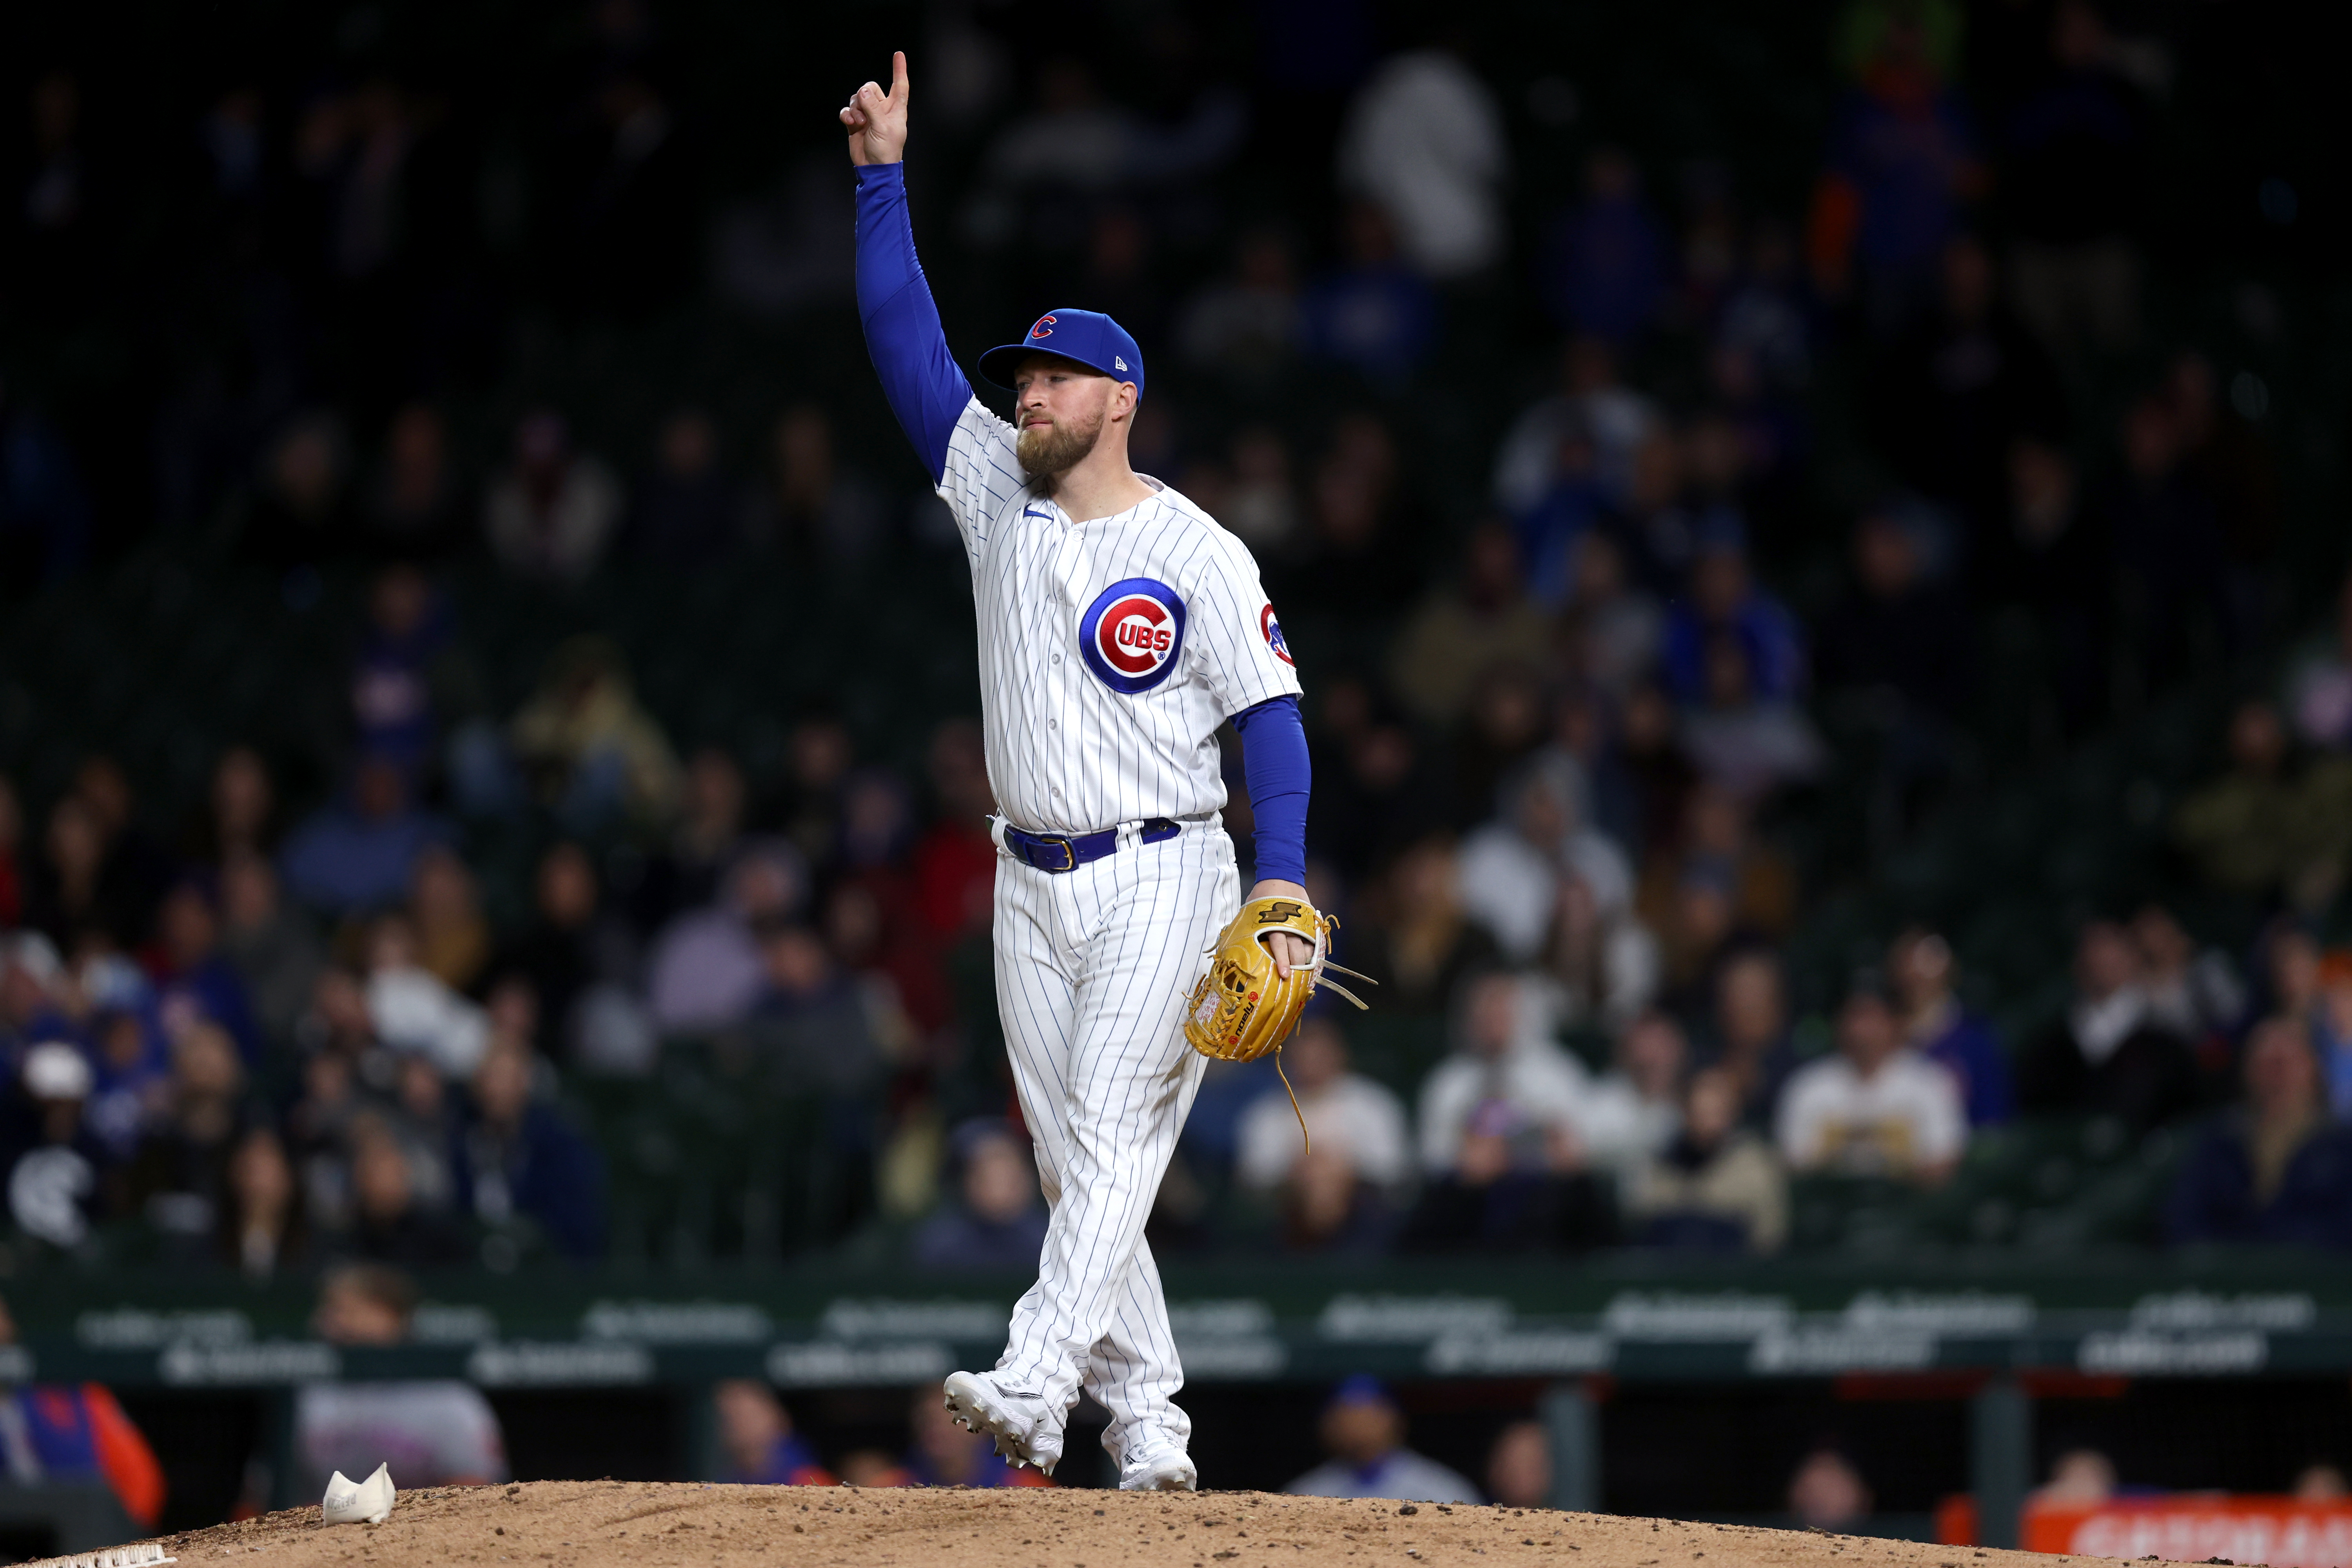 Game Time Dine - Former Chicago Cubs pitcher Kerry Wood